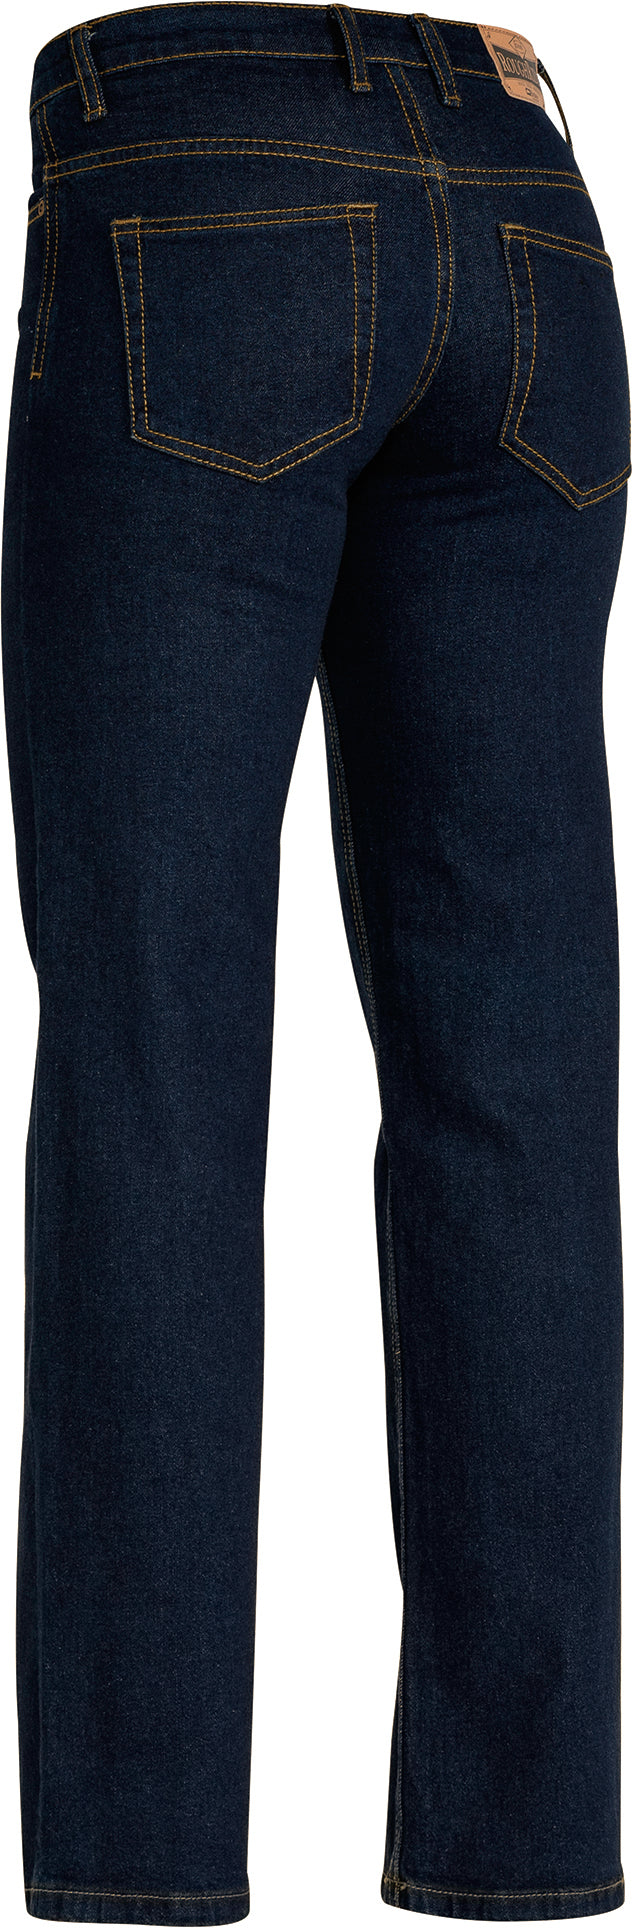 Load image into Gallery viewer, Wholesale BPL6712 Bisley Womens Rough Rider Denim Stretch Jeans Printed or Blank
